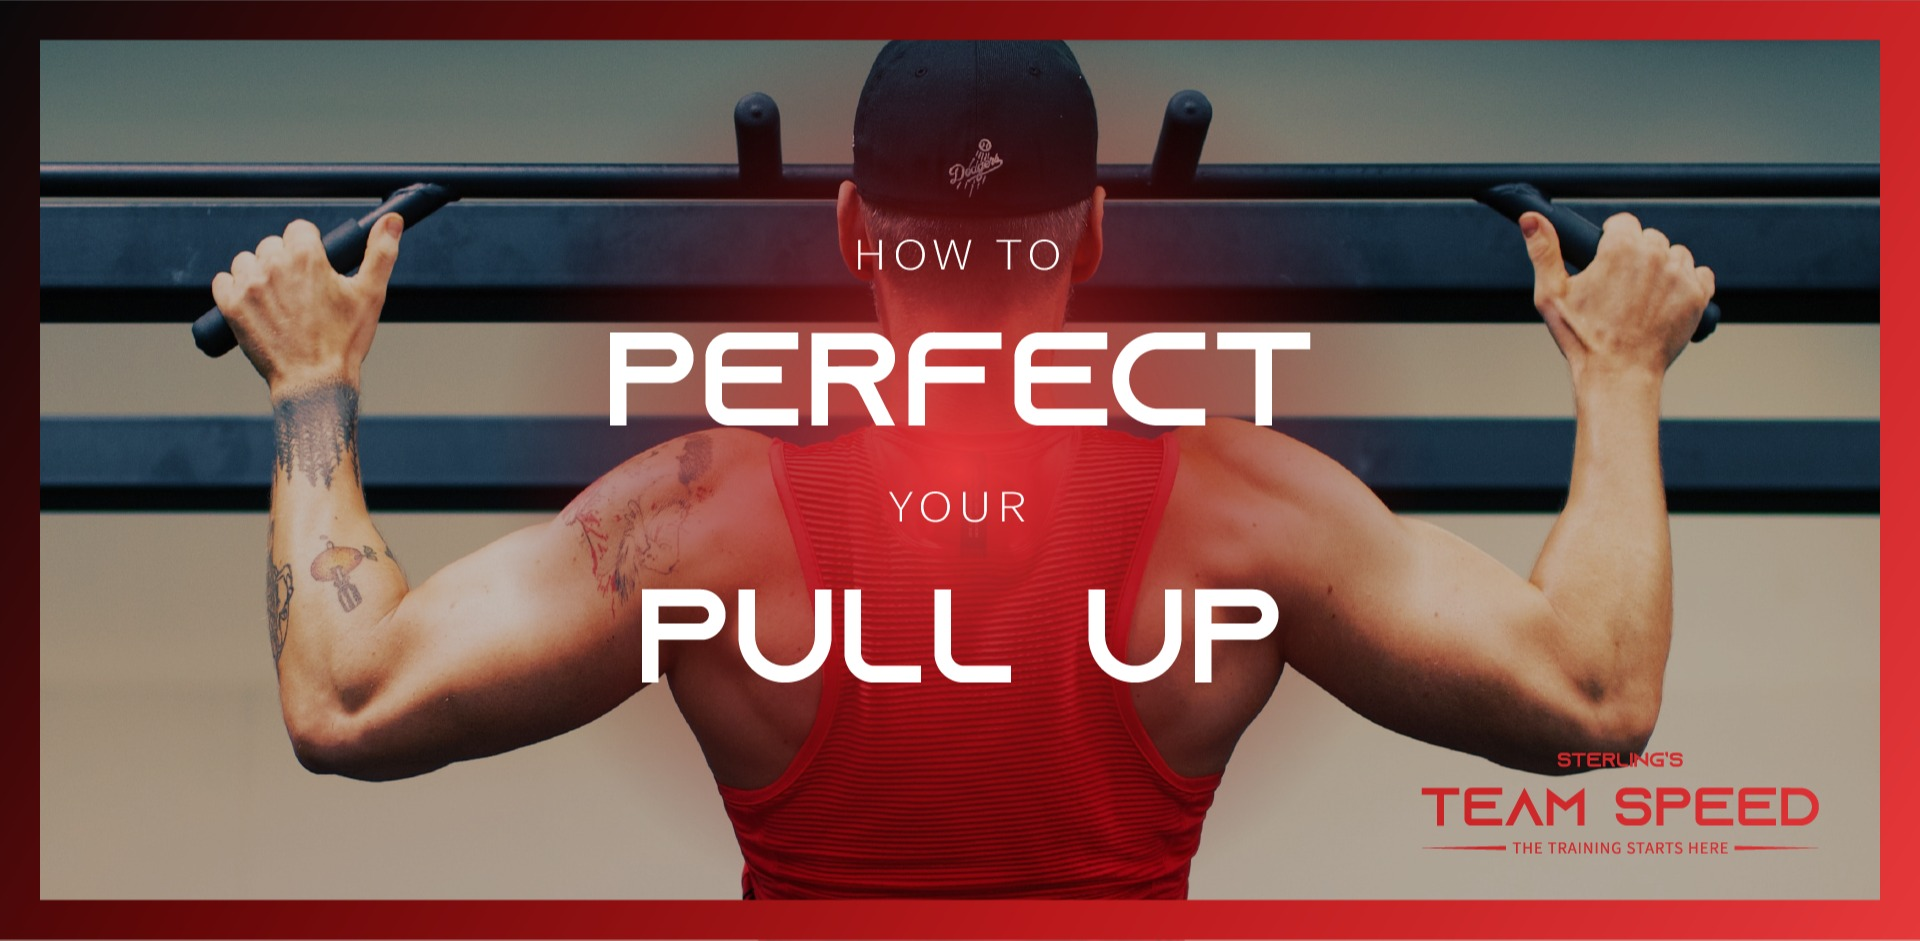 
How to Perfect Your Pull Ups